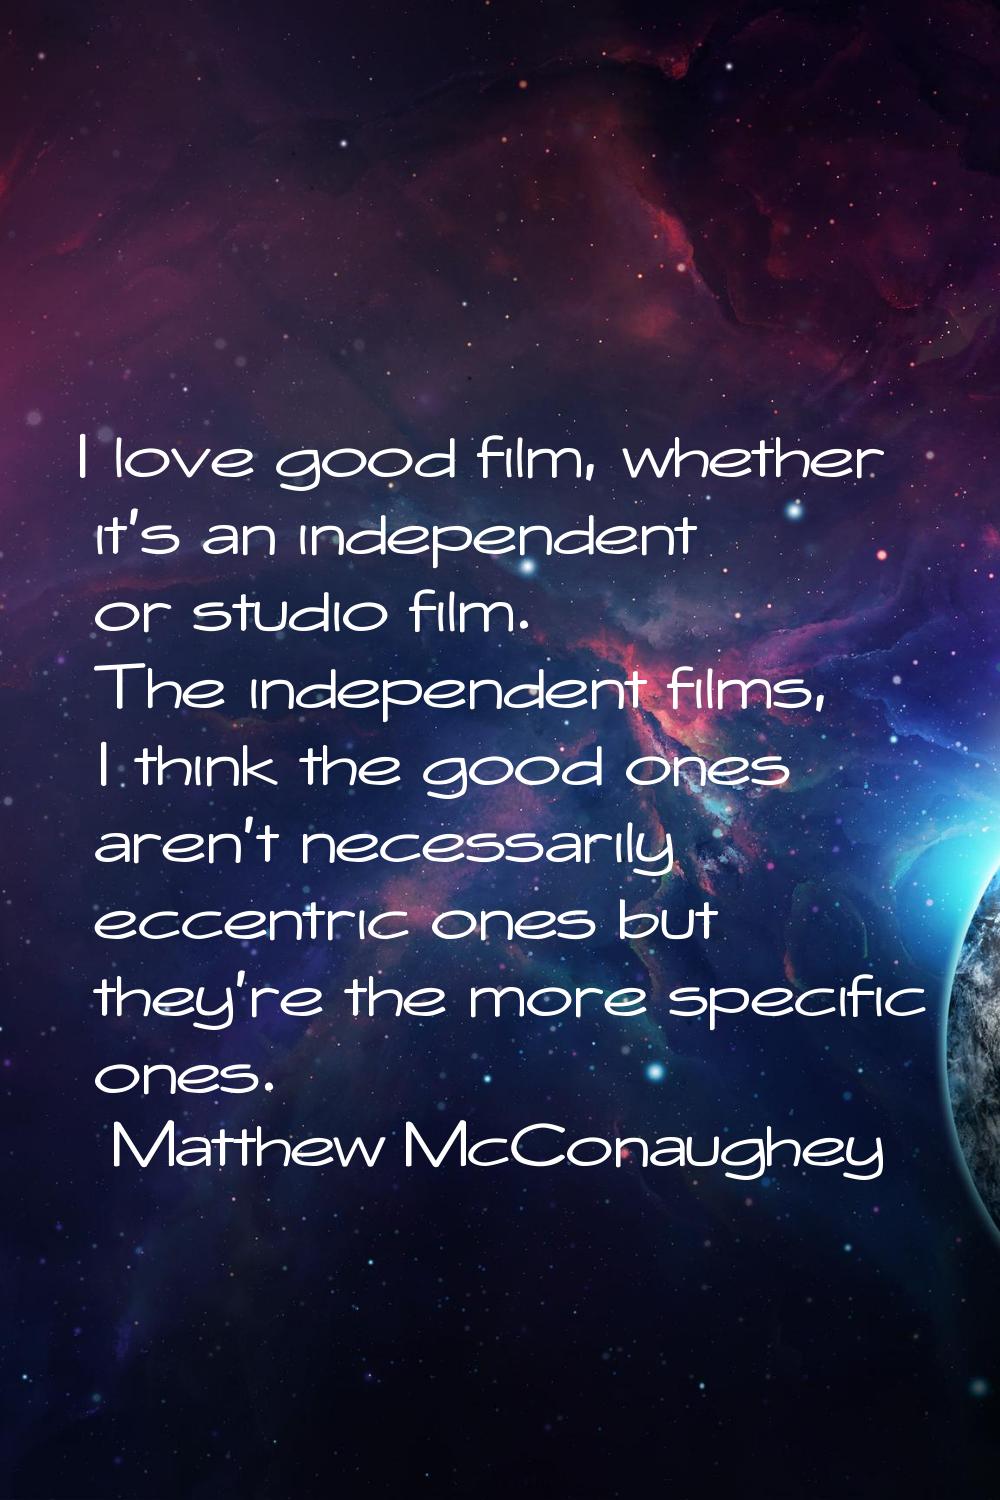 I love good film, whether it's an independent or studio film. The independent films, I think the go